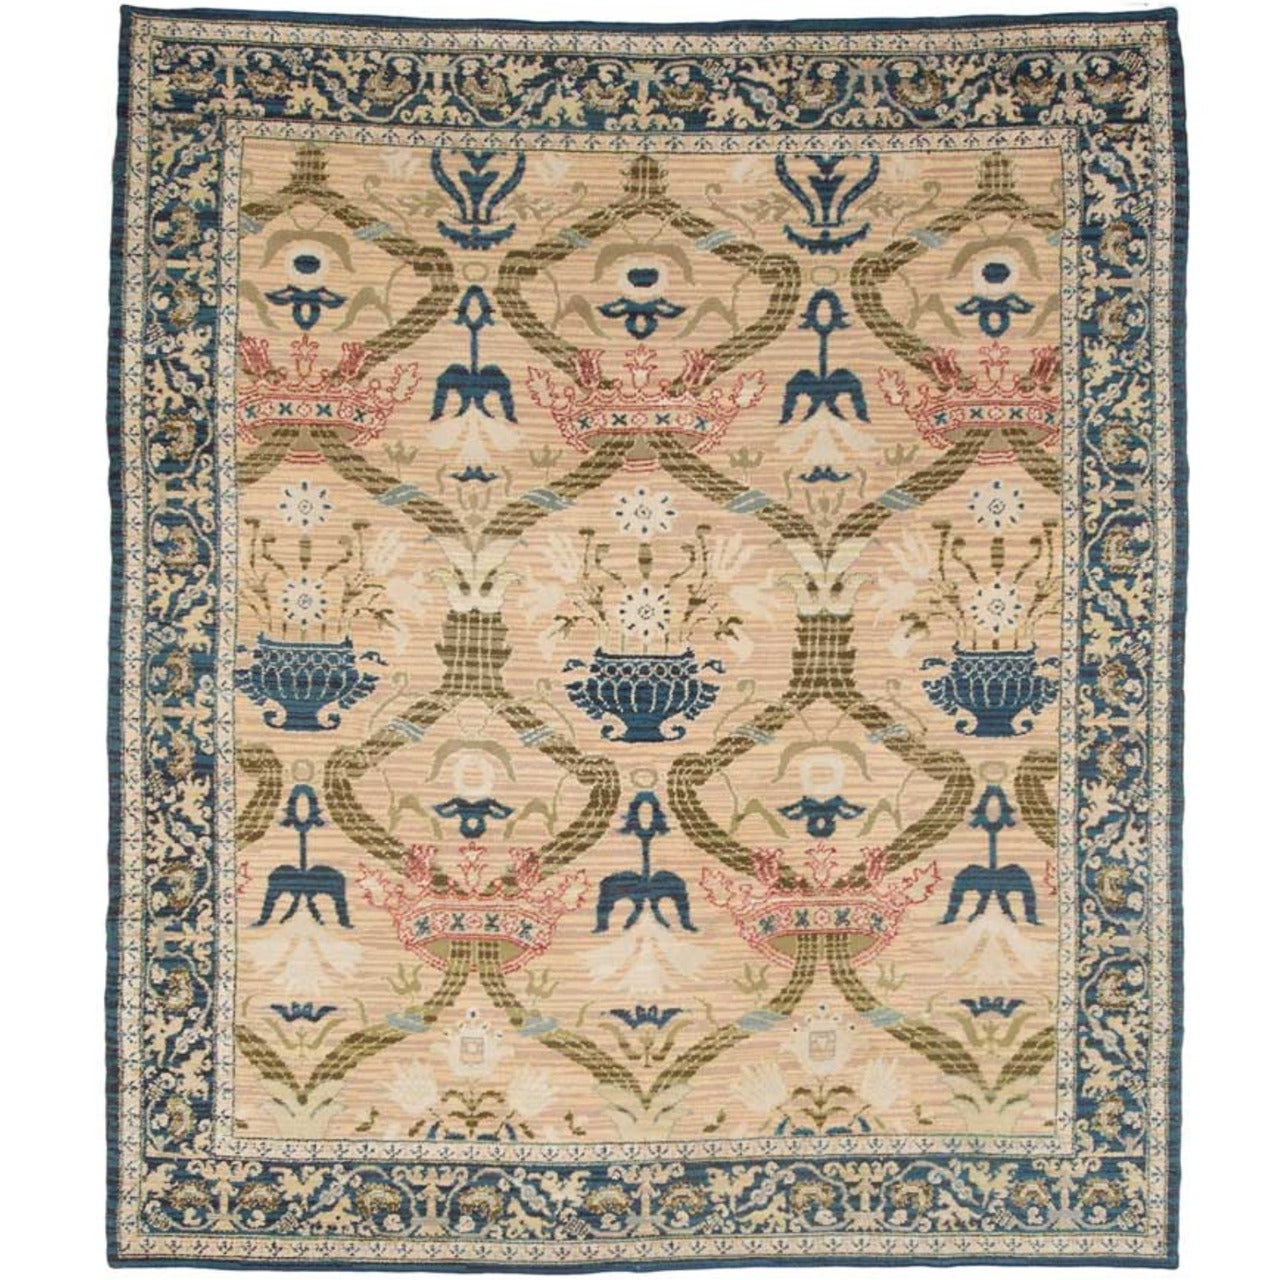 Antique Spanish Rug with Crowns